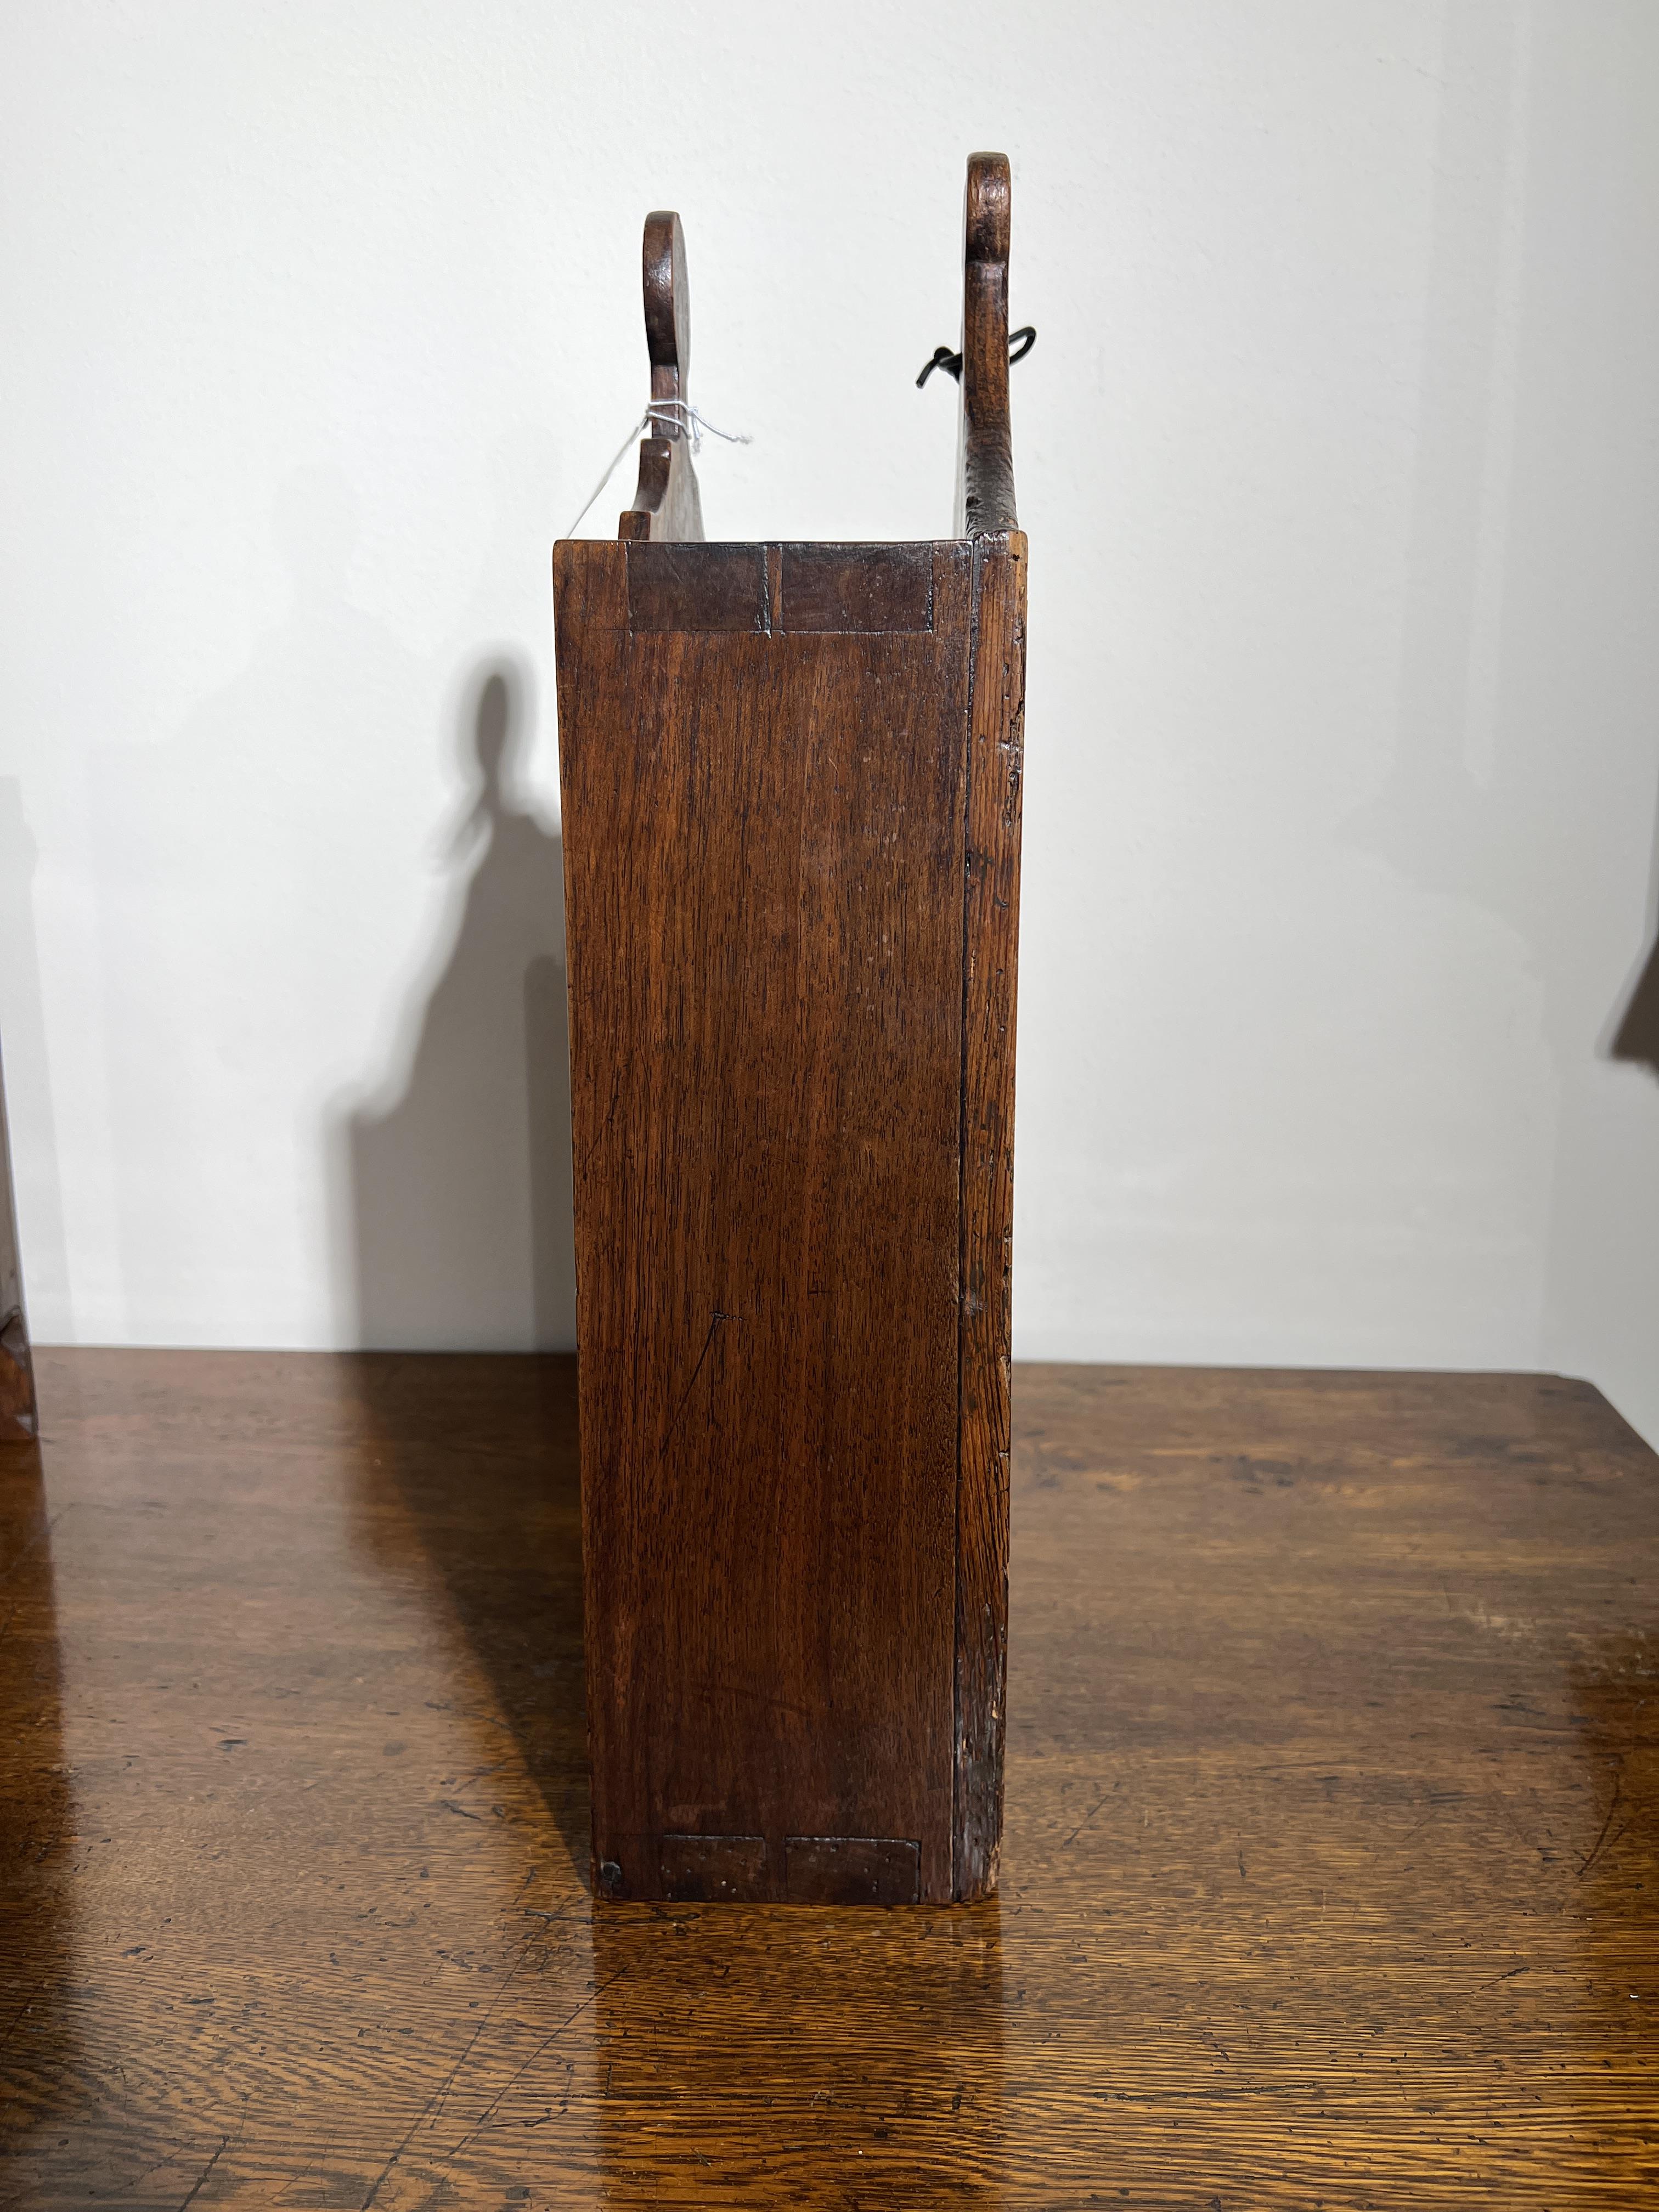 A FRENCH PROVINCIAL WALNUT CANDLE BOX LATE 18TH / EARLY 19TH CENTURYwith a sliding cover and - Image 11 of 18